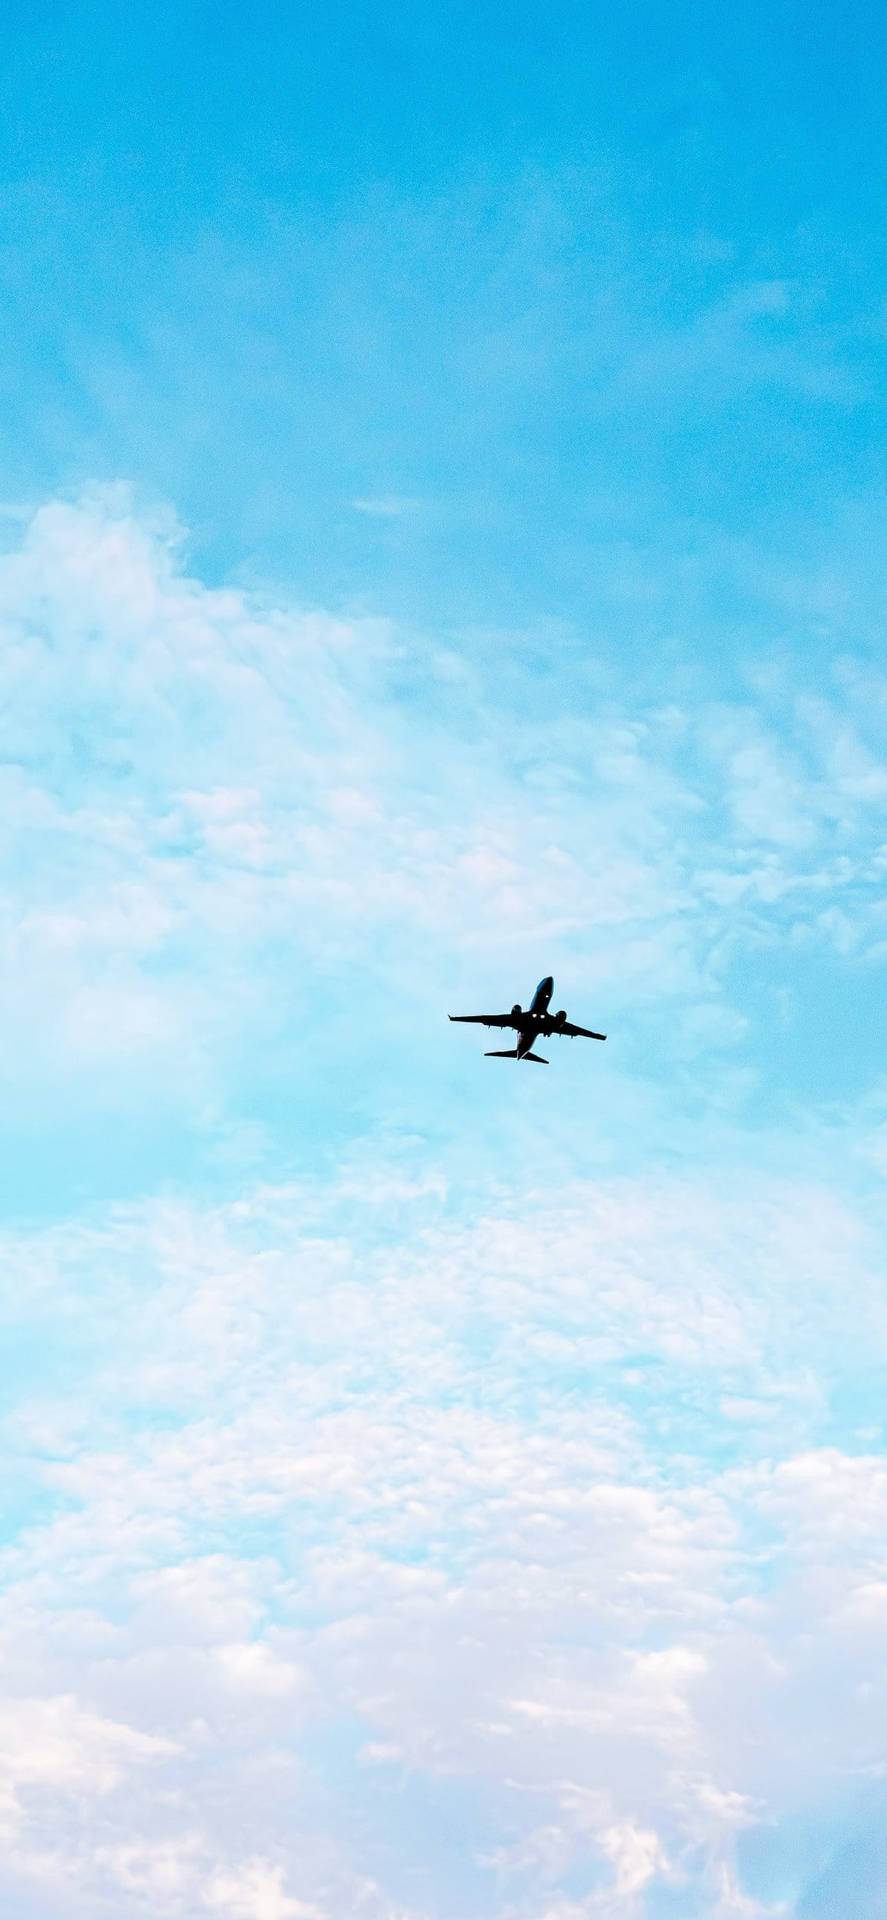 Cute Pastel Blue Aesthetic Airplane In Sky Background